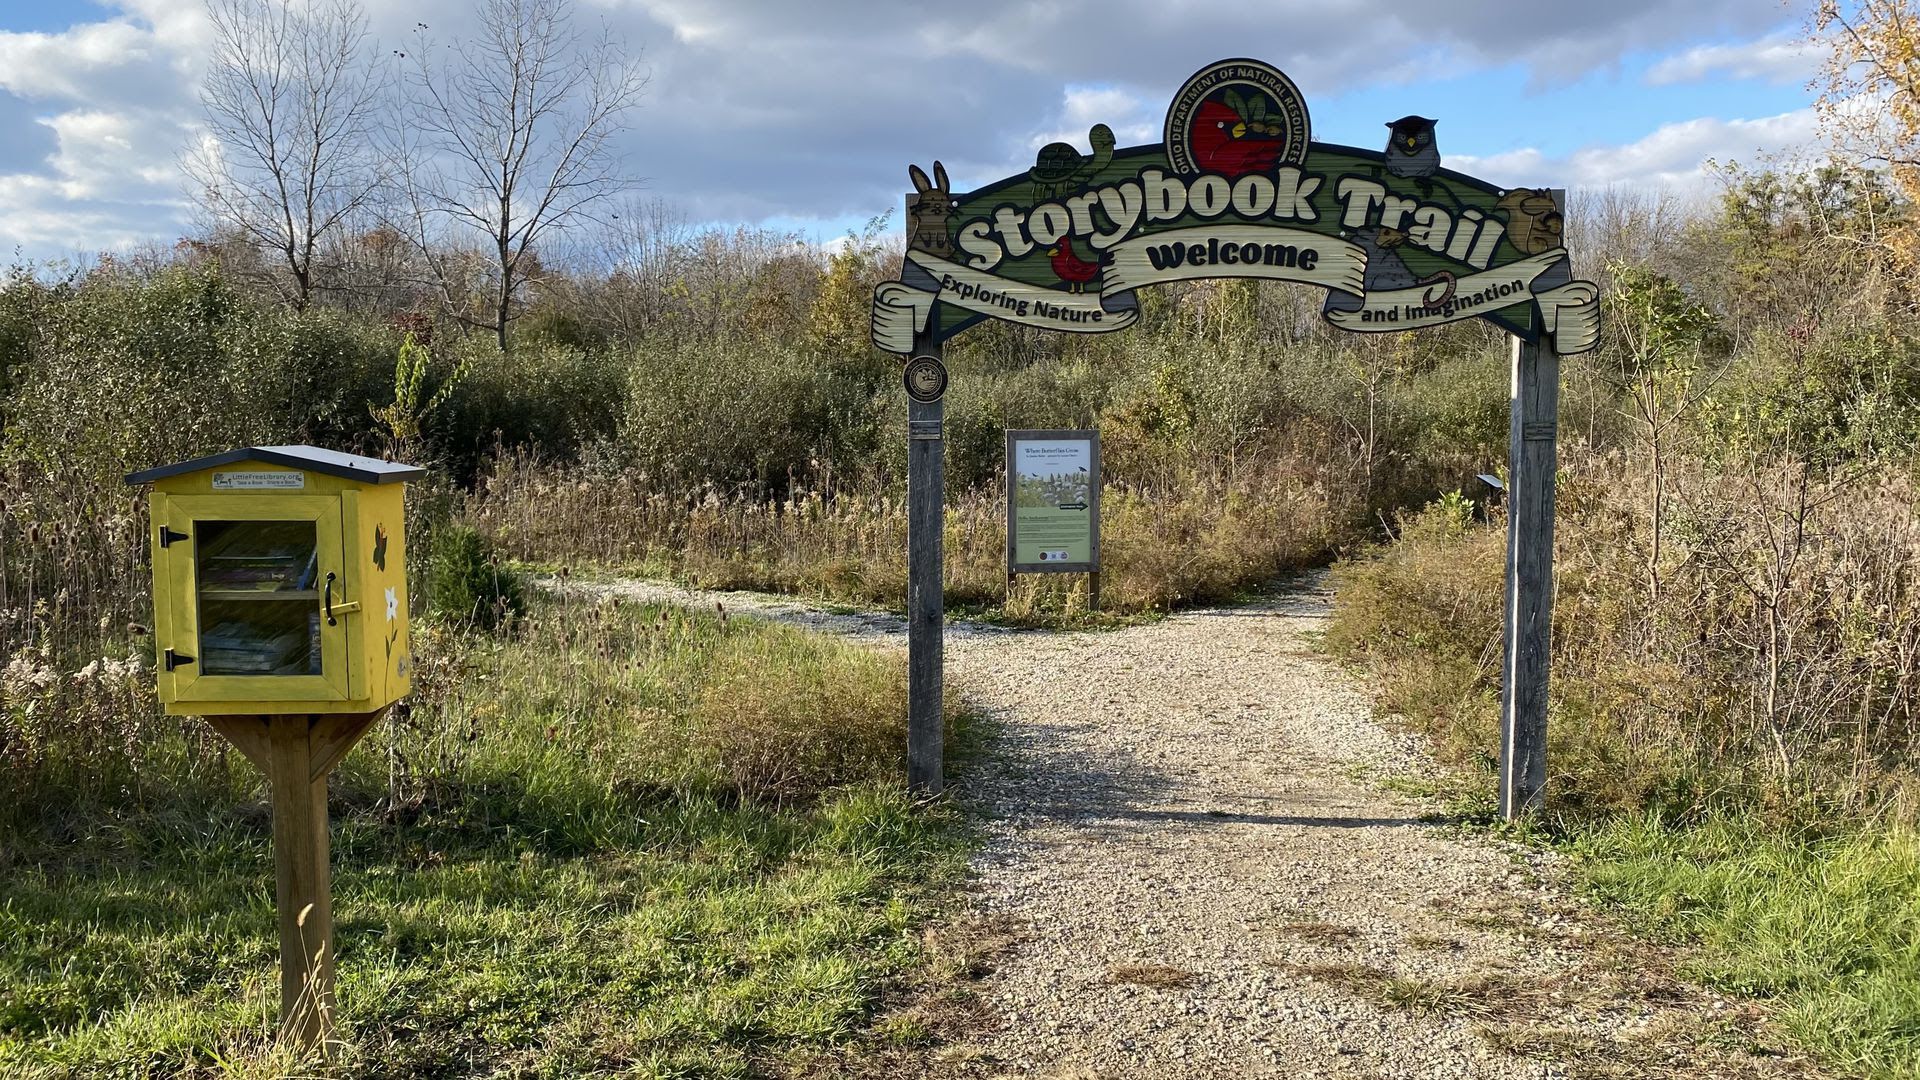 The entrance to "Storybook Trail" at Alum Creek State Park.